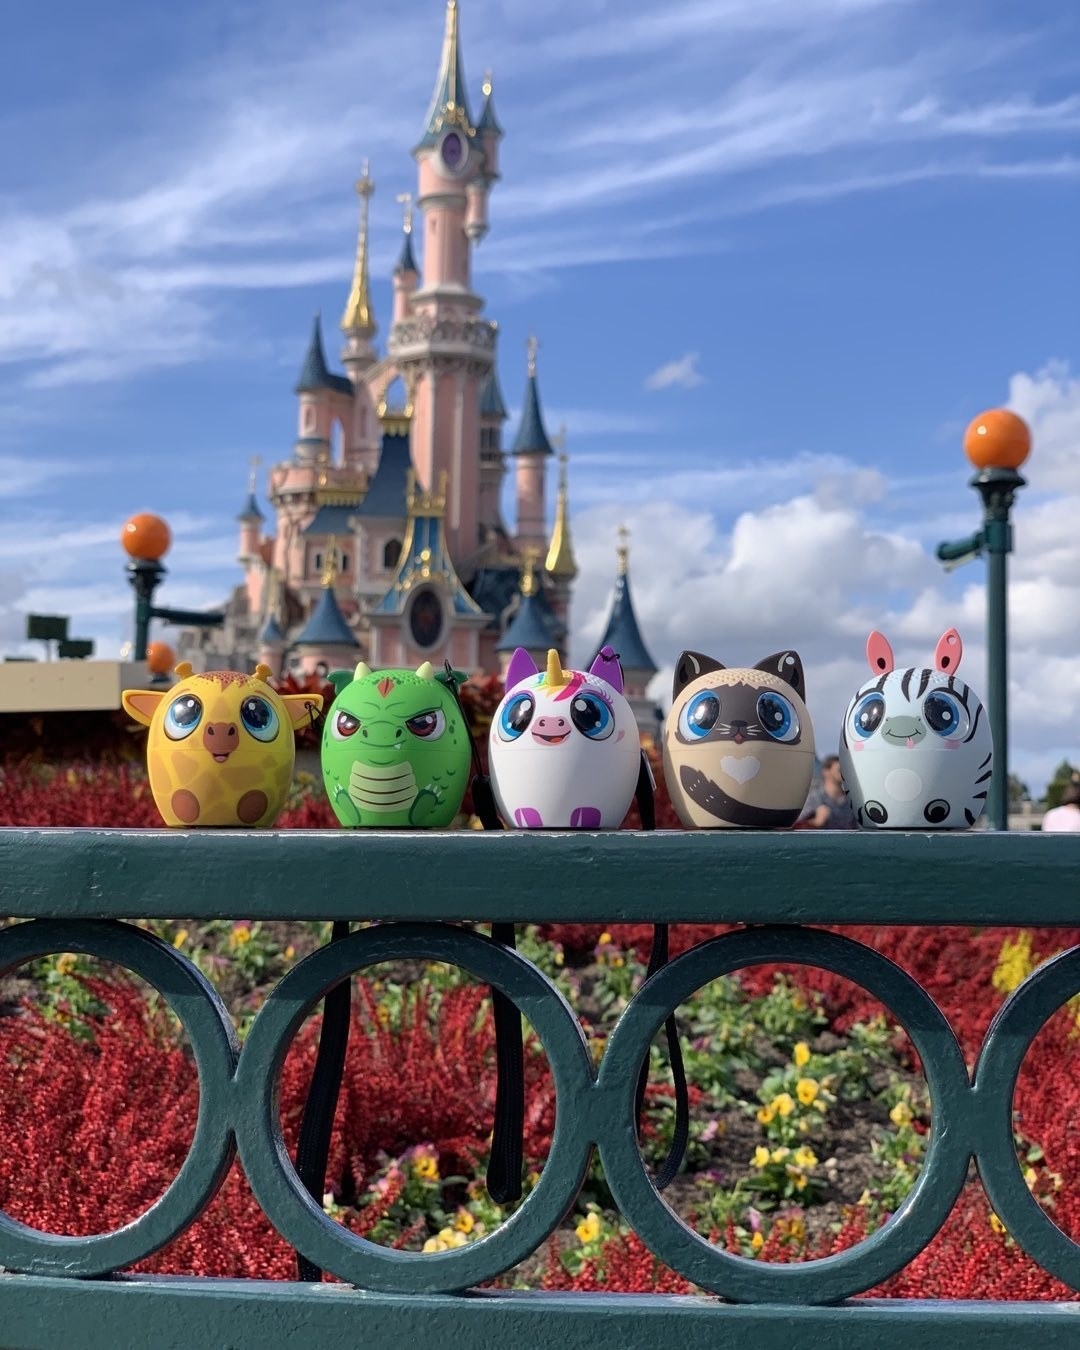 Several speakers lined up in front of a Disney castle